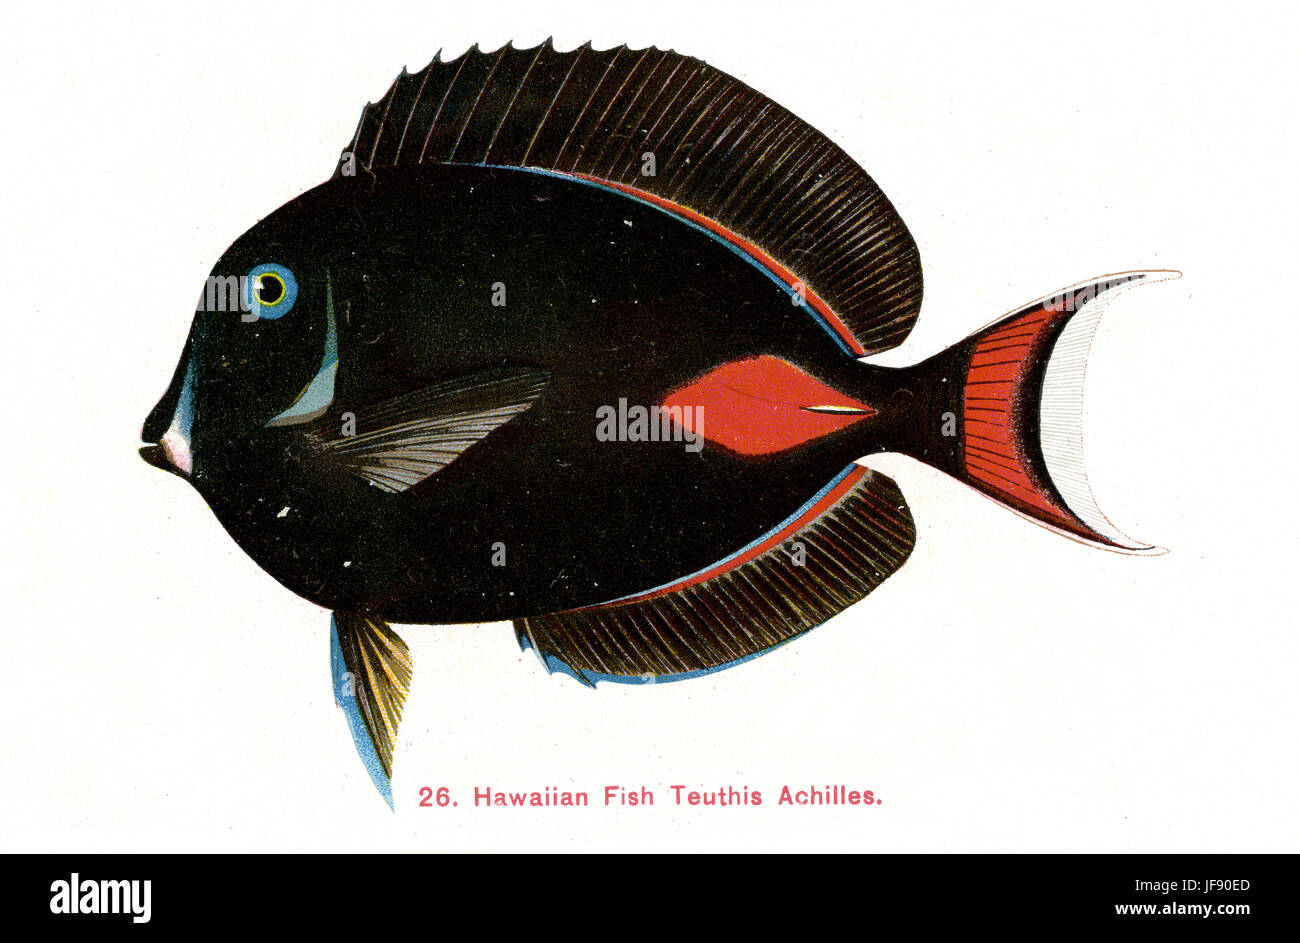 Achilles surgeonfish / Achilles tang (Acanthurus achilles, formerly Teuthis Achilles), Pacific fish species found around the coast of Hawaii Stock Photo